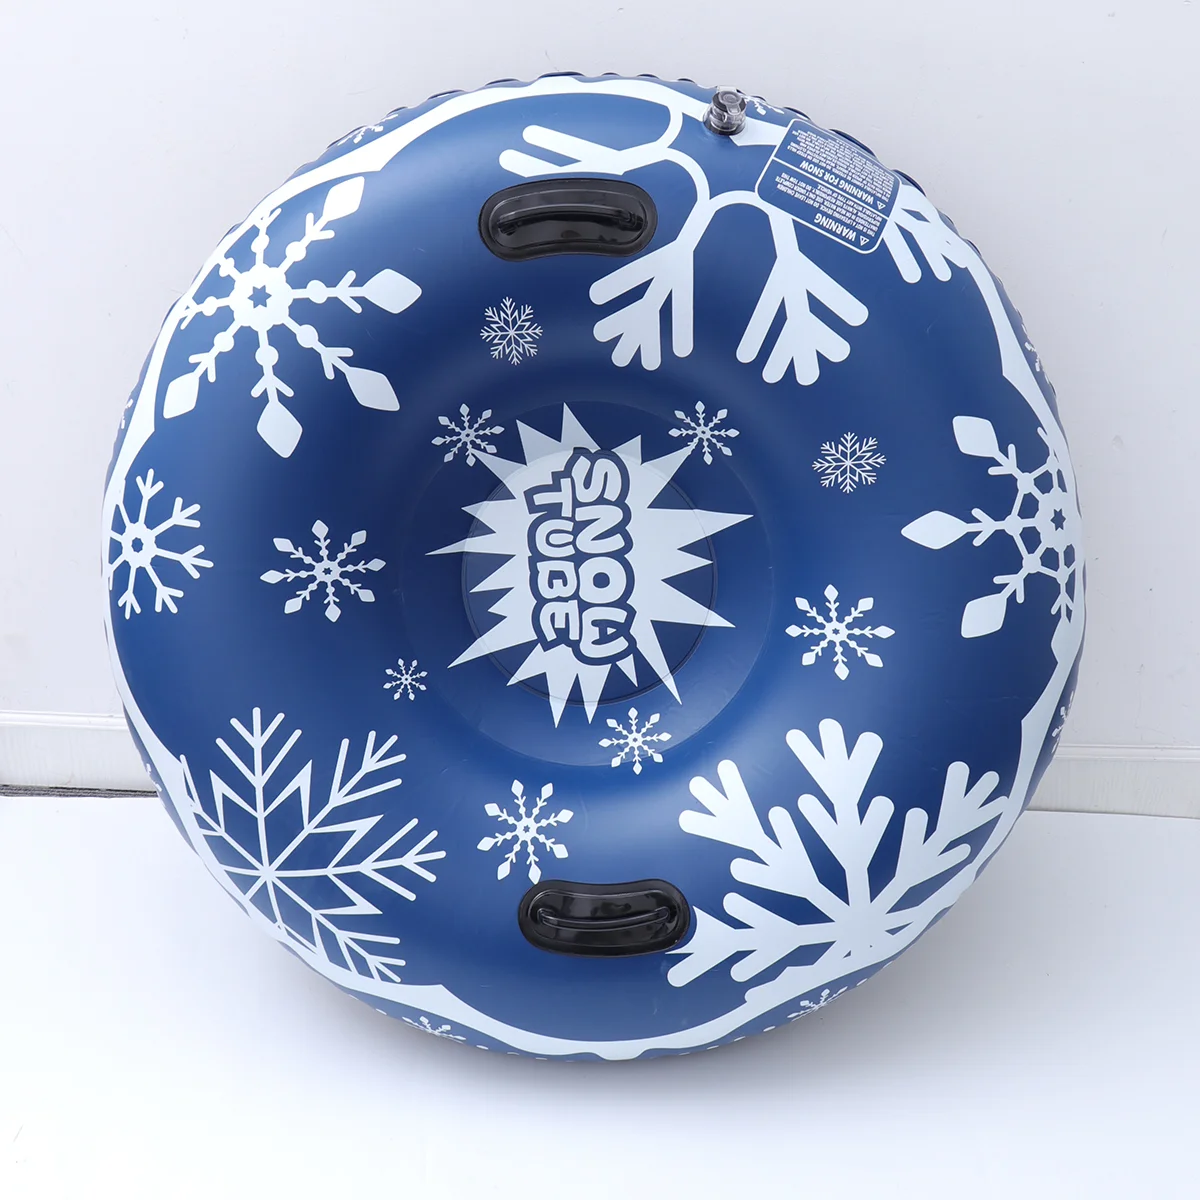 

Inches Blue Inflatable Snow Tube PVC Snowflake Printing Snow Sled Heavy Duty Circle for Skiing Skating and Snow Games